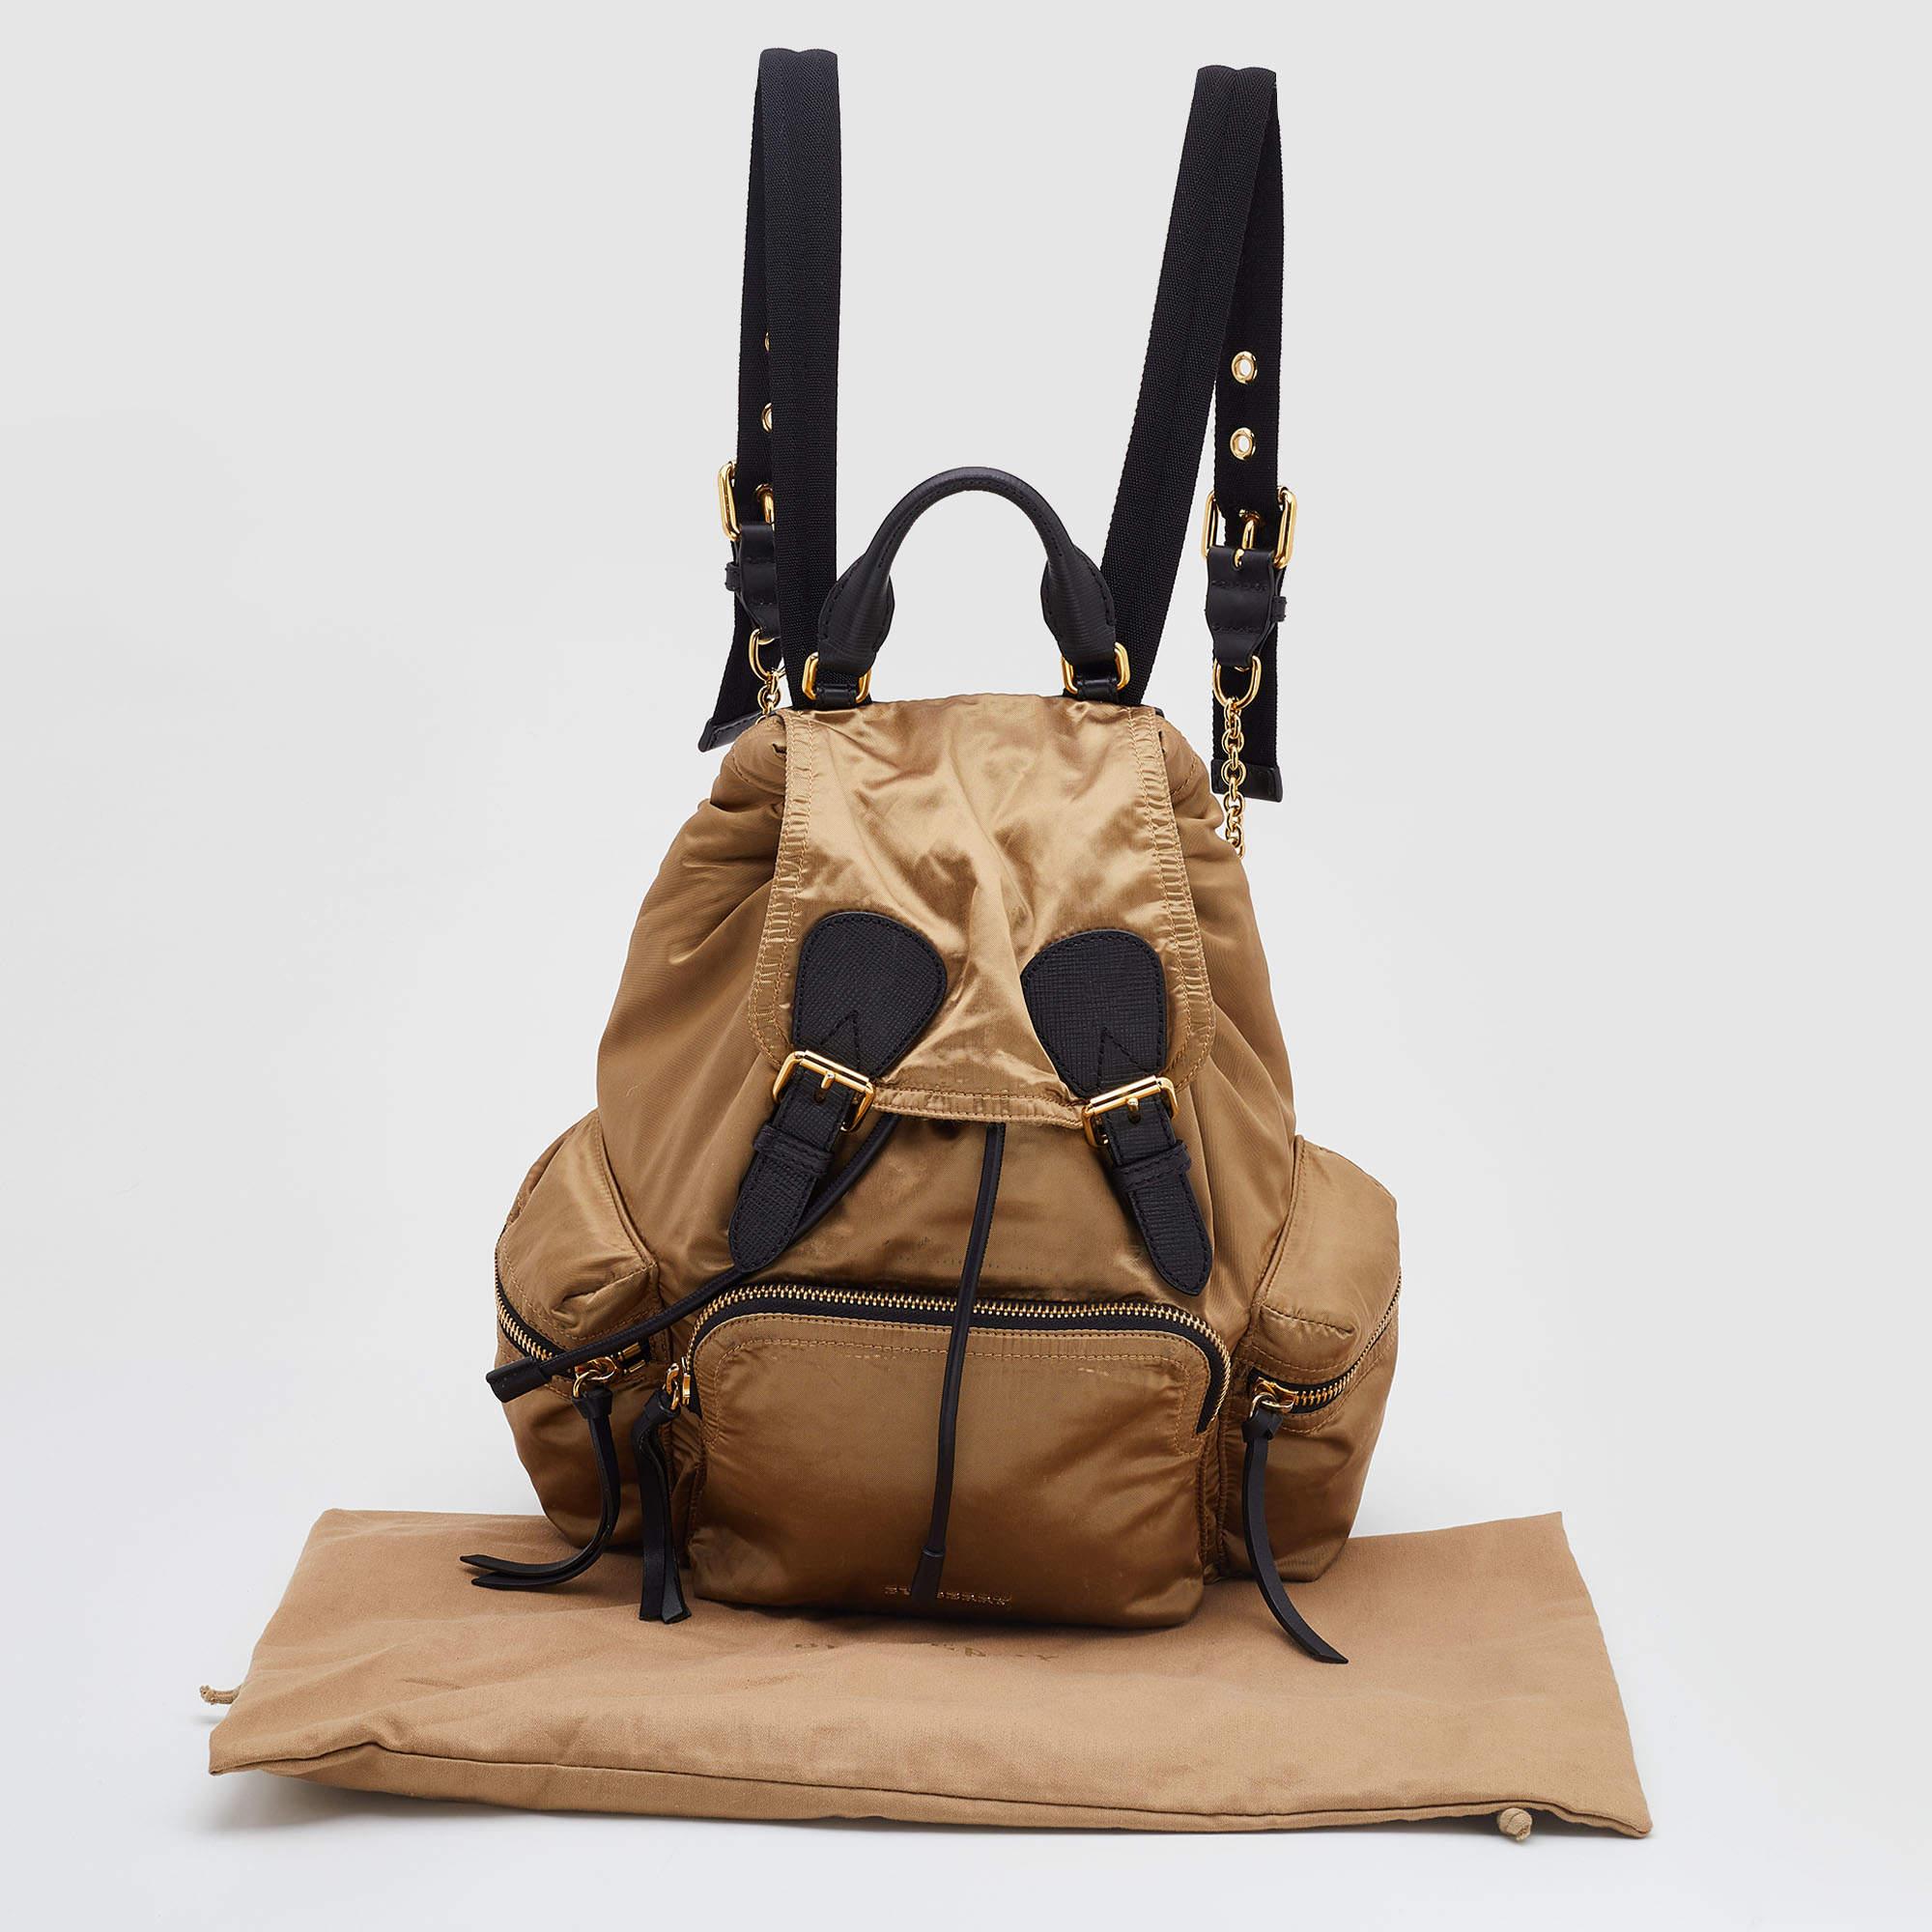 Burberry Gold/Black Nylon and Leather Rucksack Backpack 6